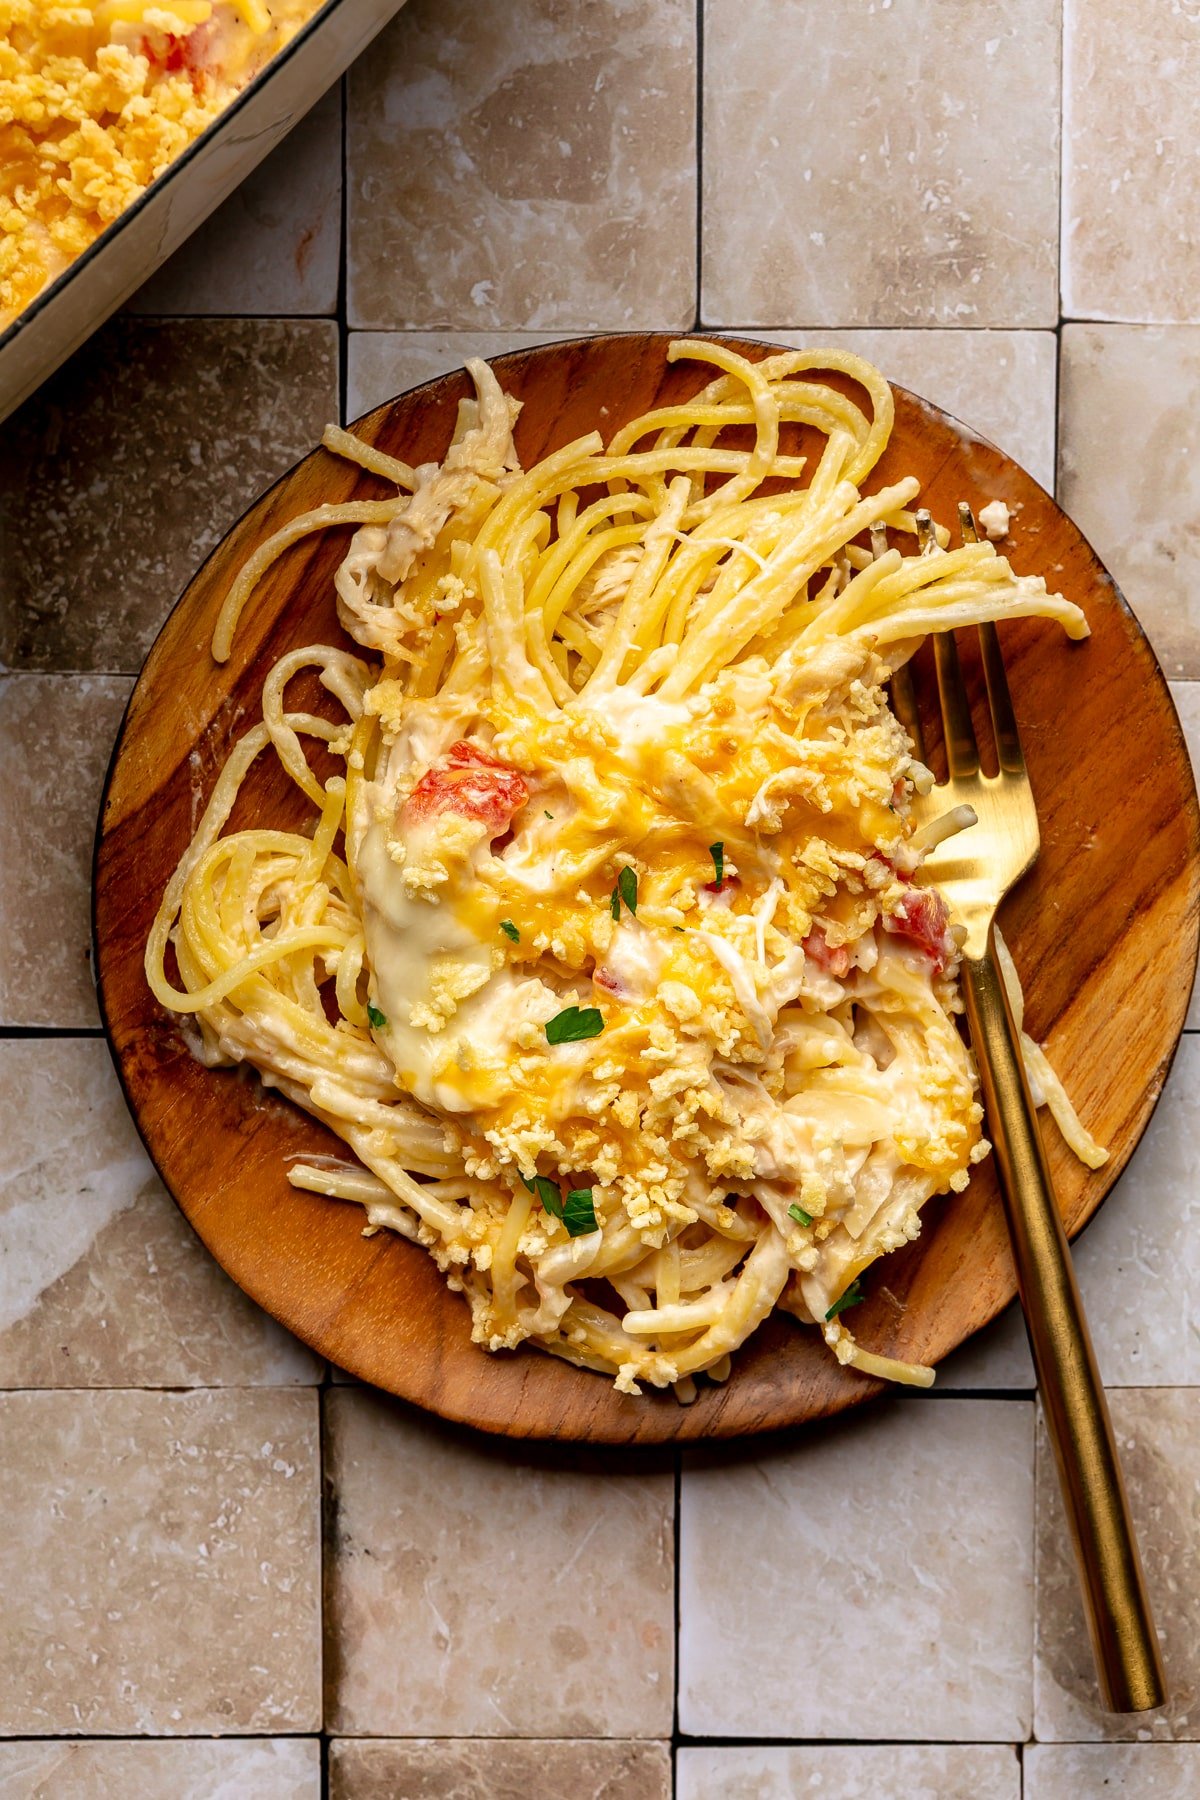 Spaghetti, topped with the baked chicken mixture, sits on a wooden serving plate. A gold colored spoon sits to the side.